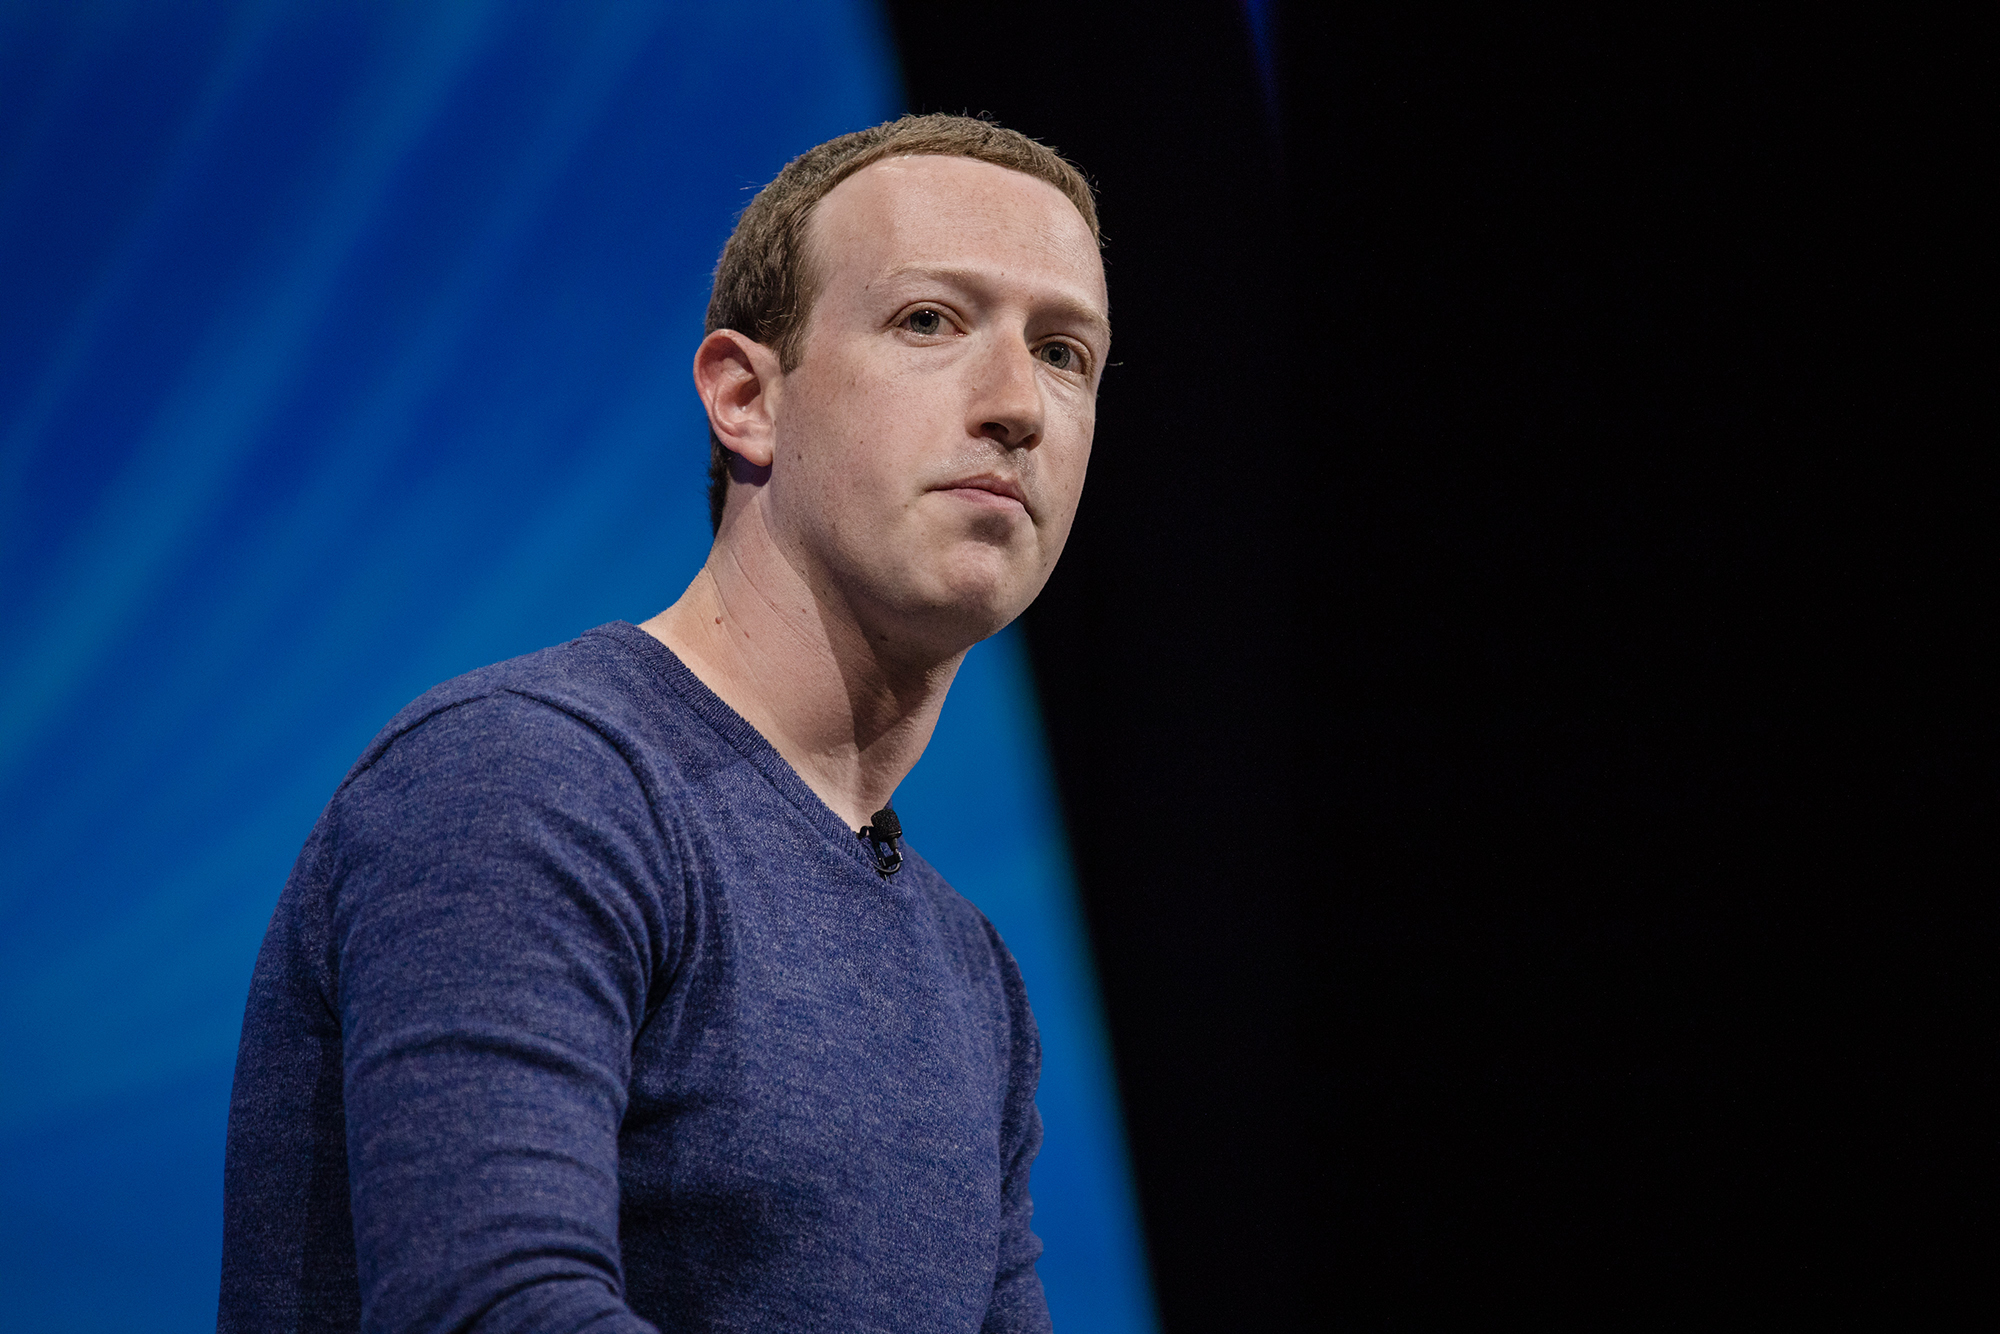 Mark Zuckerberg, chief executive officer and founder of Facebook Inc., listens during the Viva Tech...